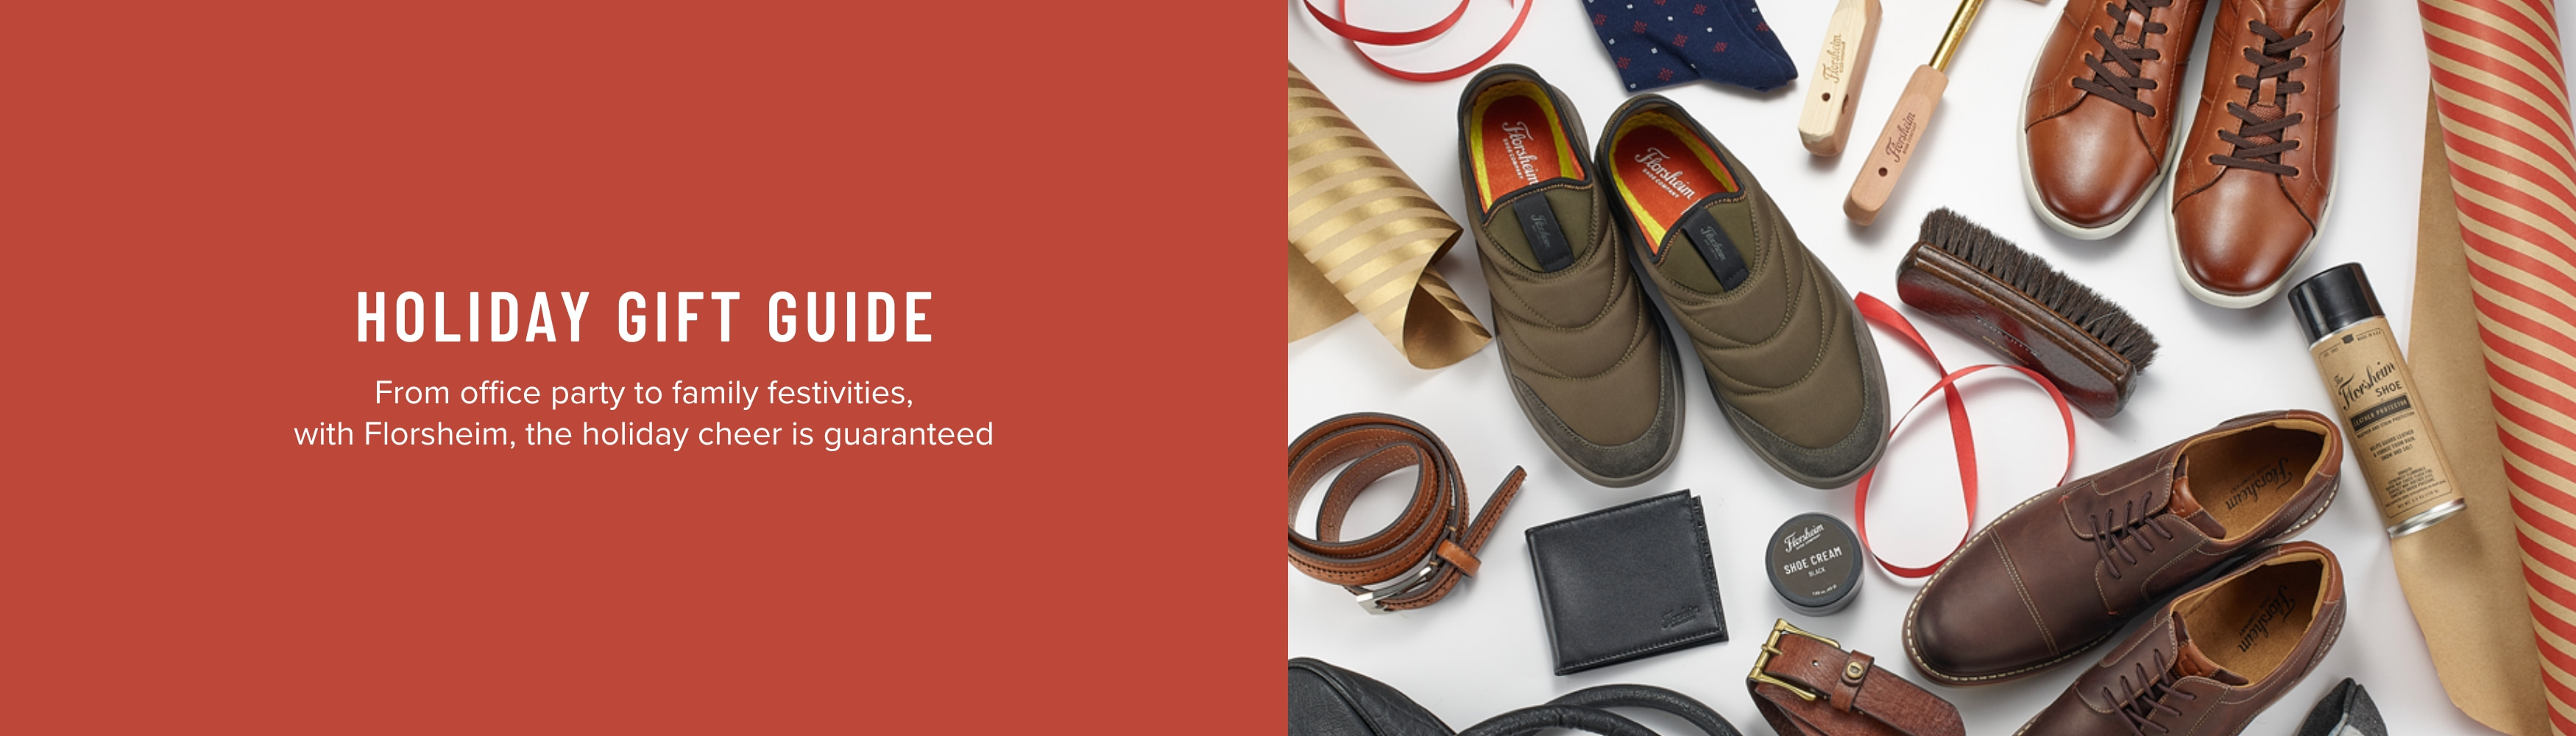 Interview Picks Shop our holiday gift guide! Image features a variety of Florsheim men's shoes and accessories.